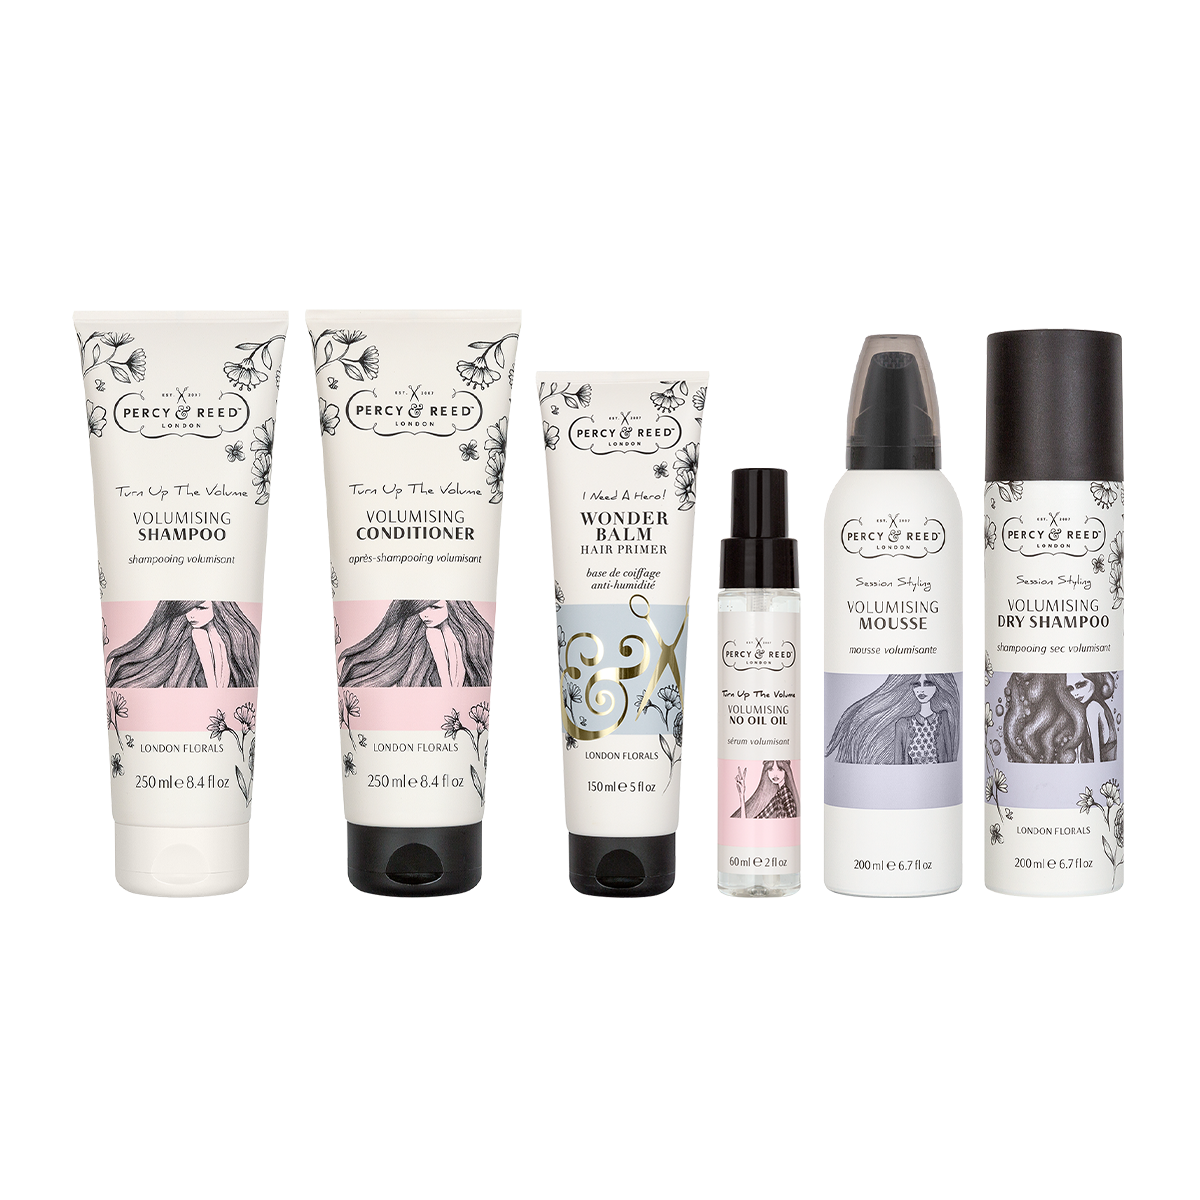 Percy & Reed London Florals Ultimate Volumising Collection